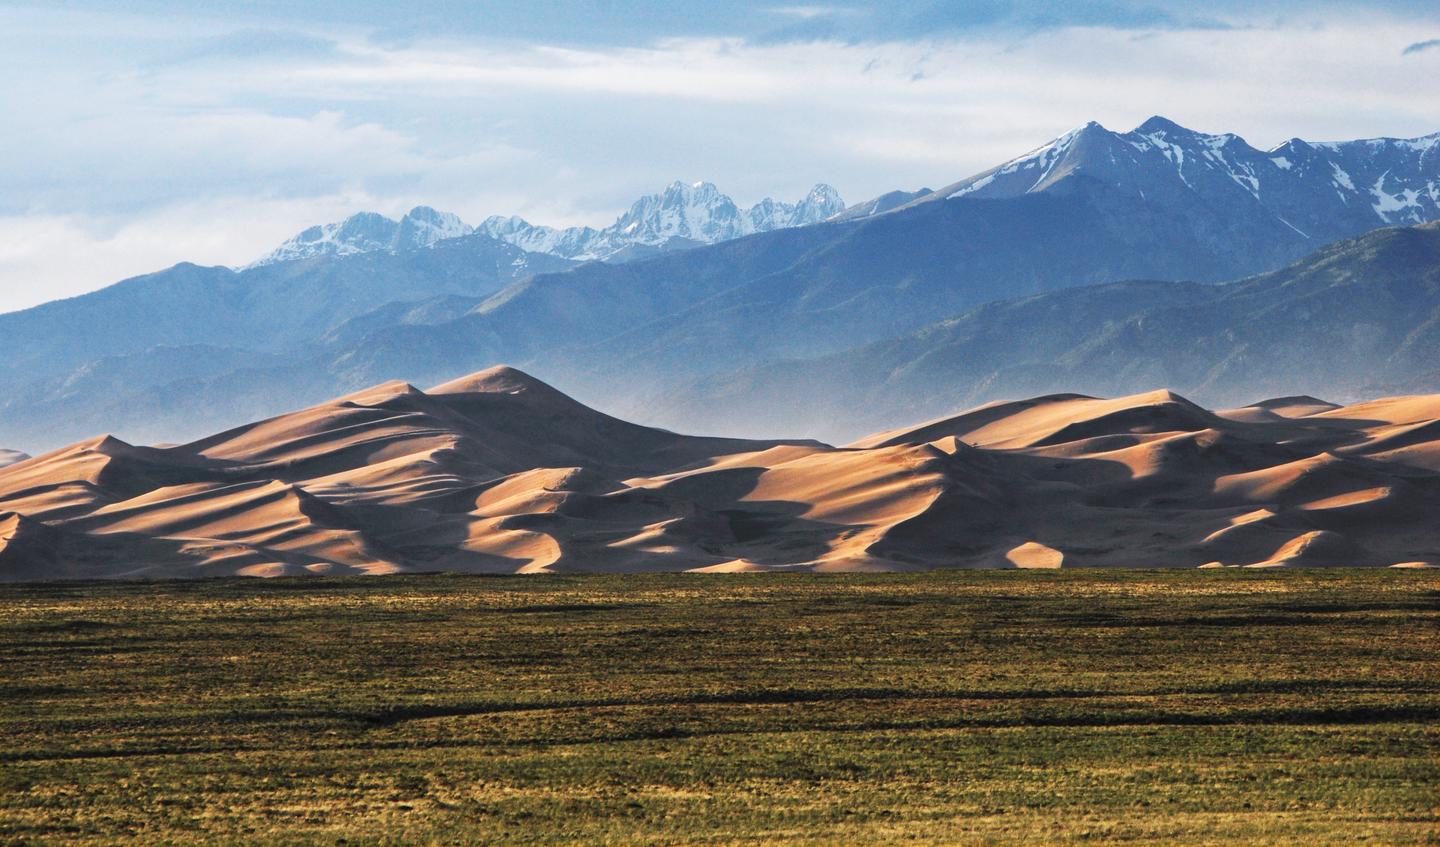 Preview photo of Great Sand Dunes National Park & Preserve